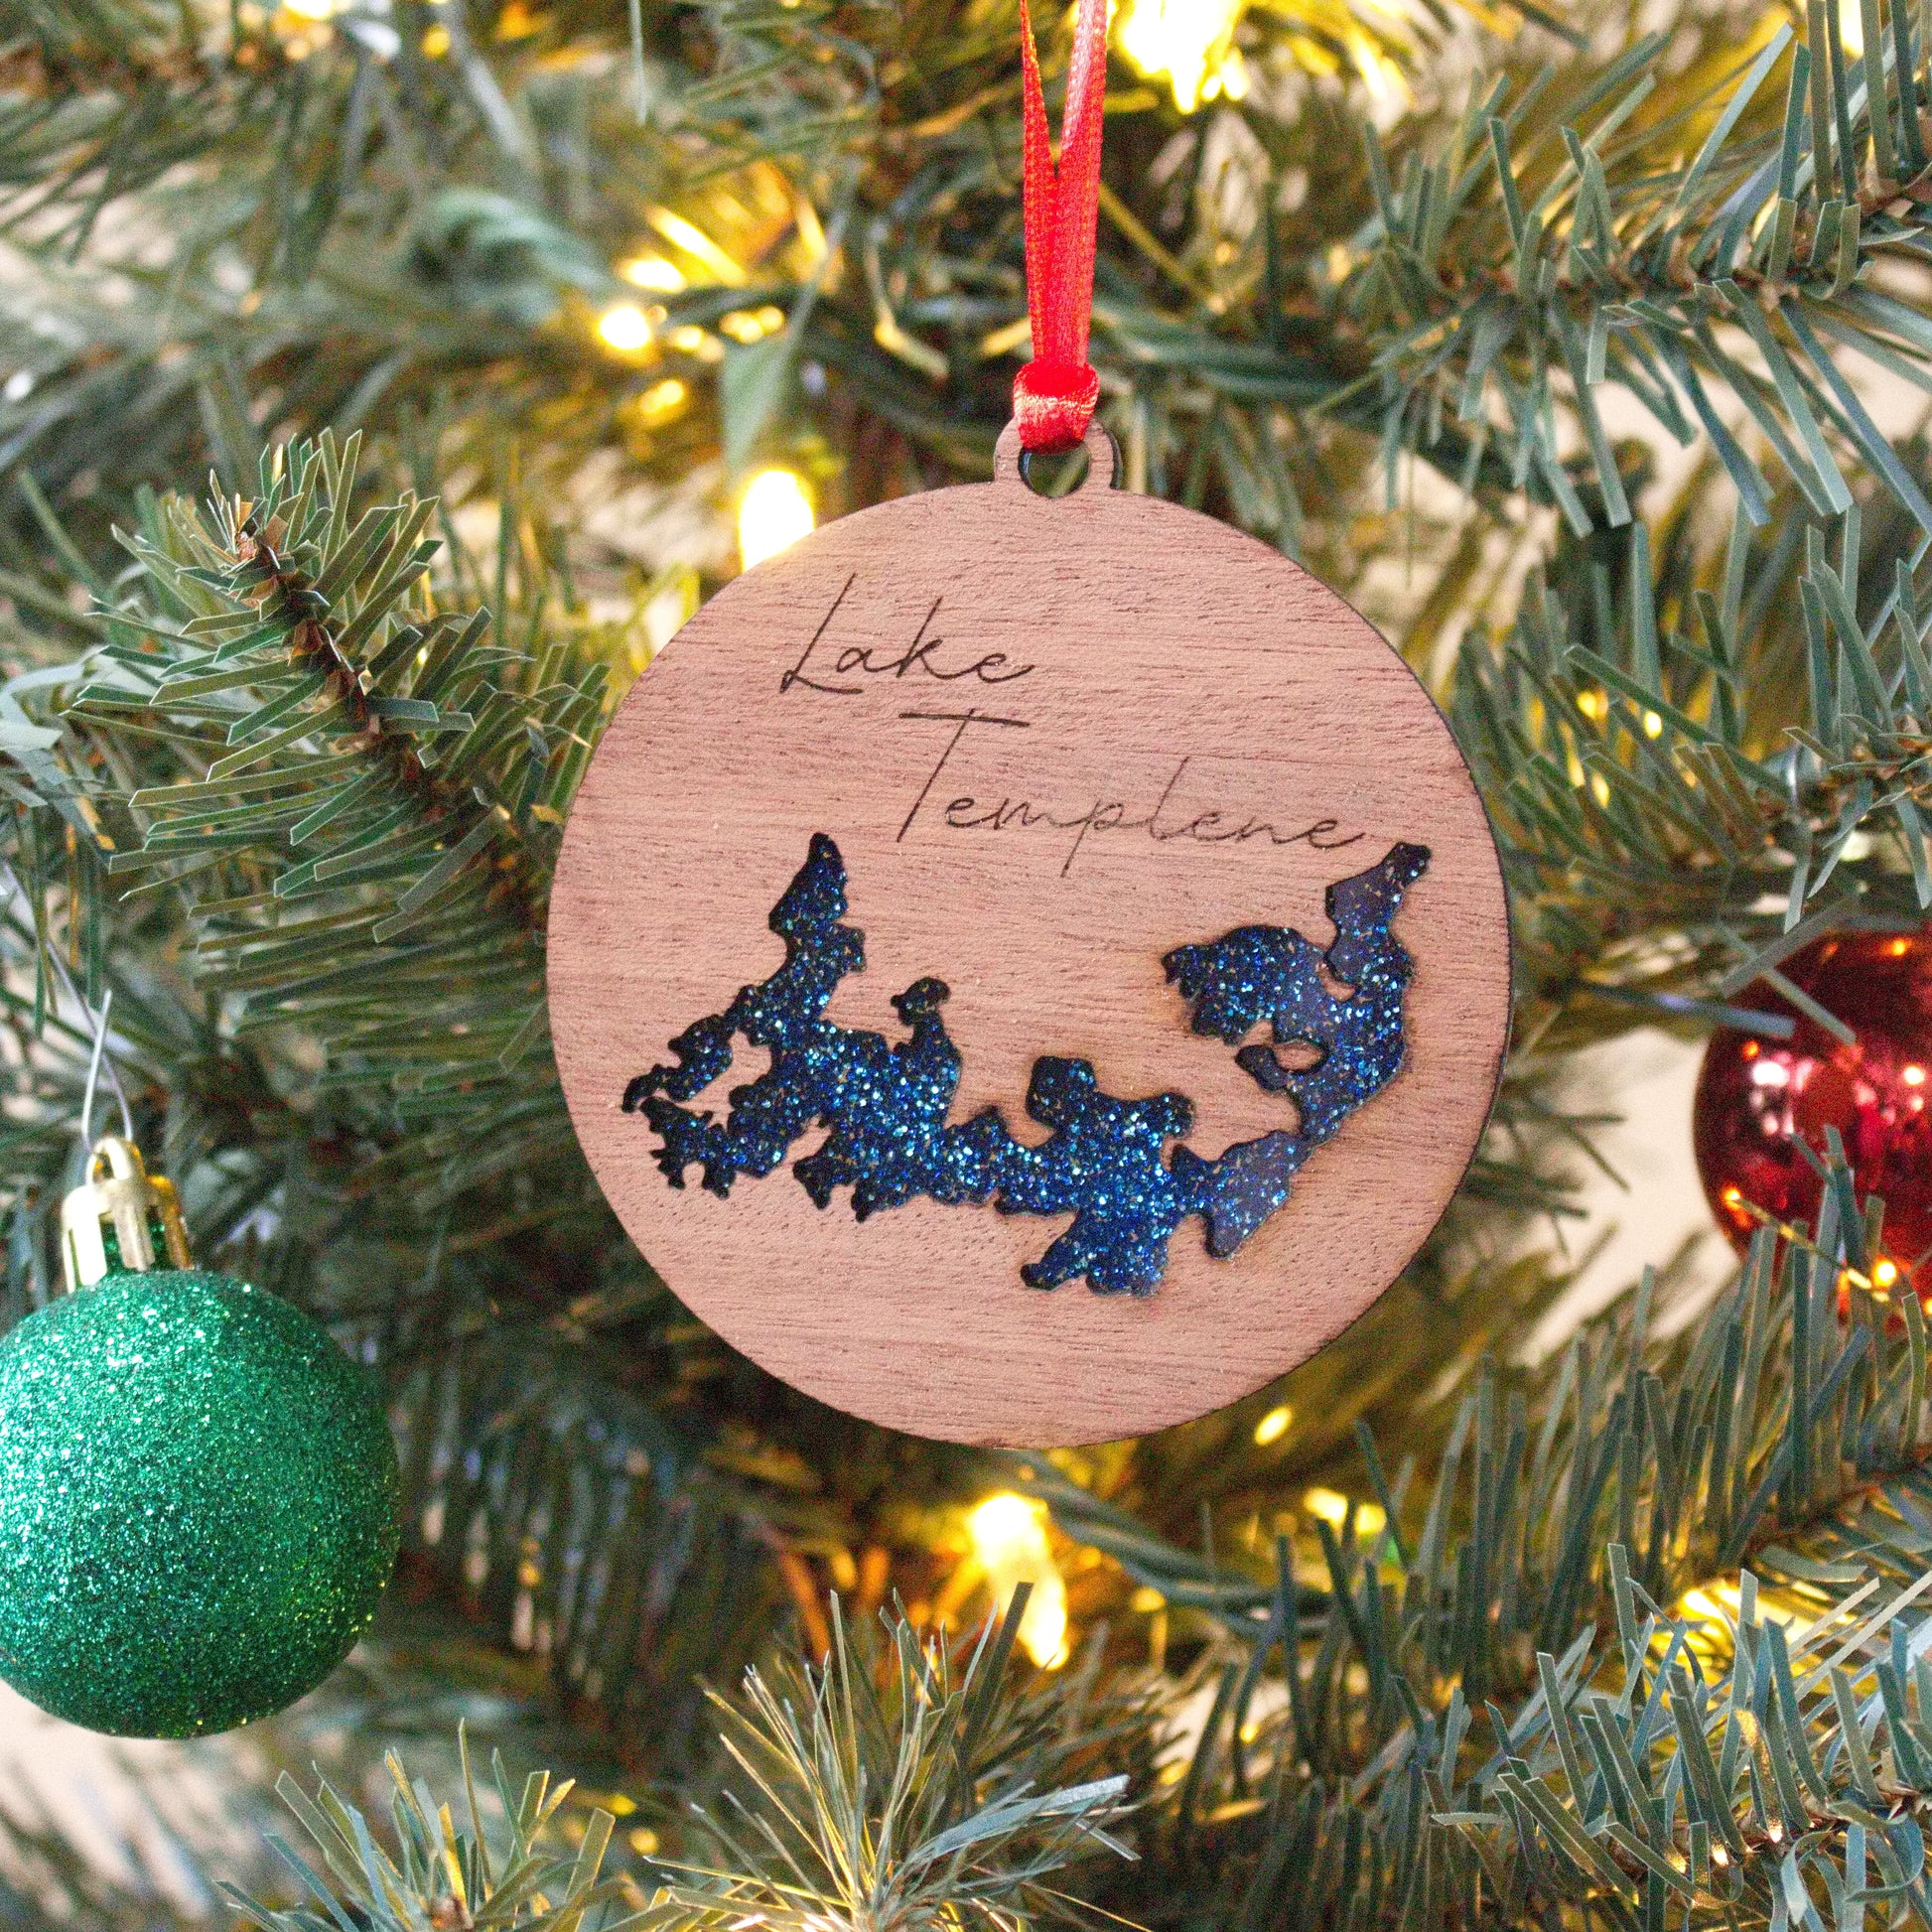 Lake Templene Acrylic and Wood Christmas Ornament.  Great for a personalized and custom gift for grandparents, parents, or children.    